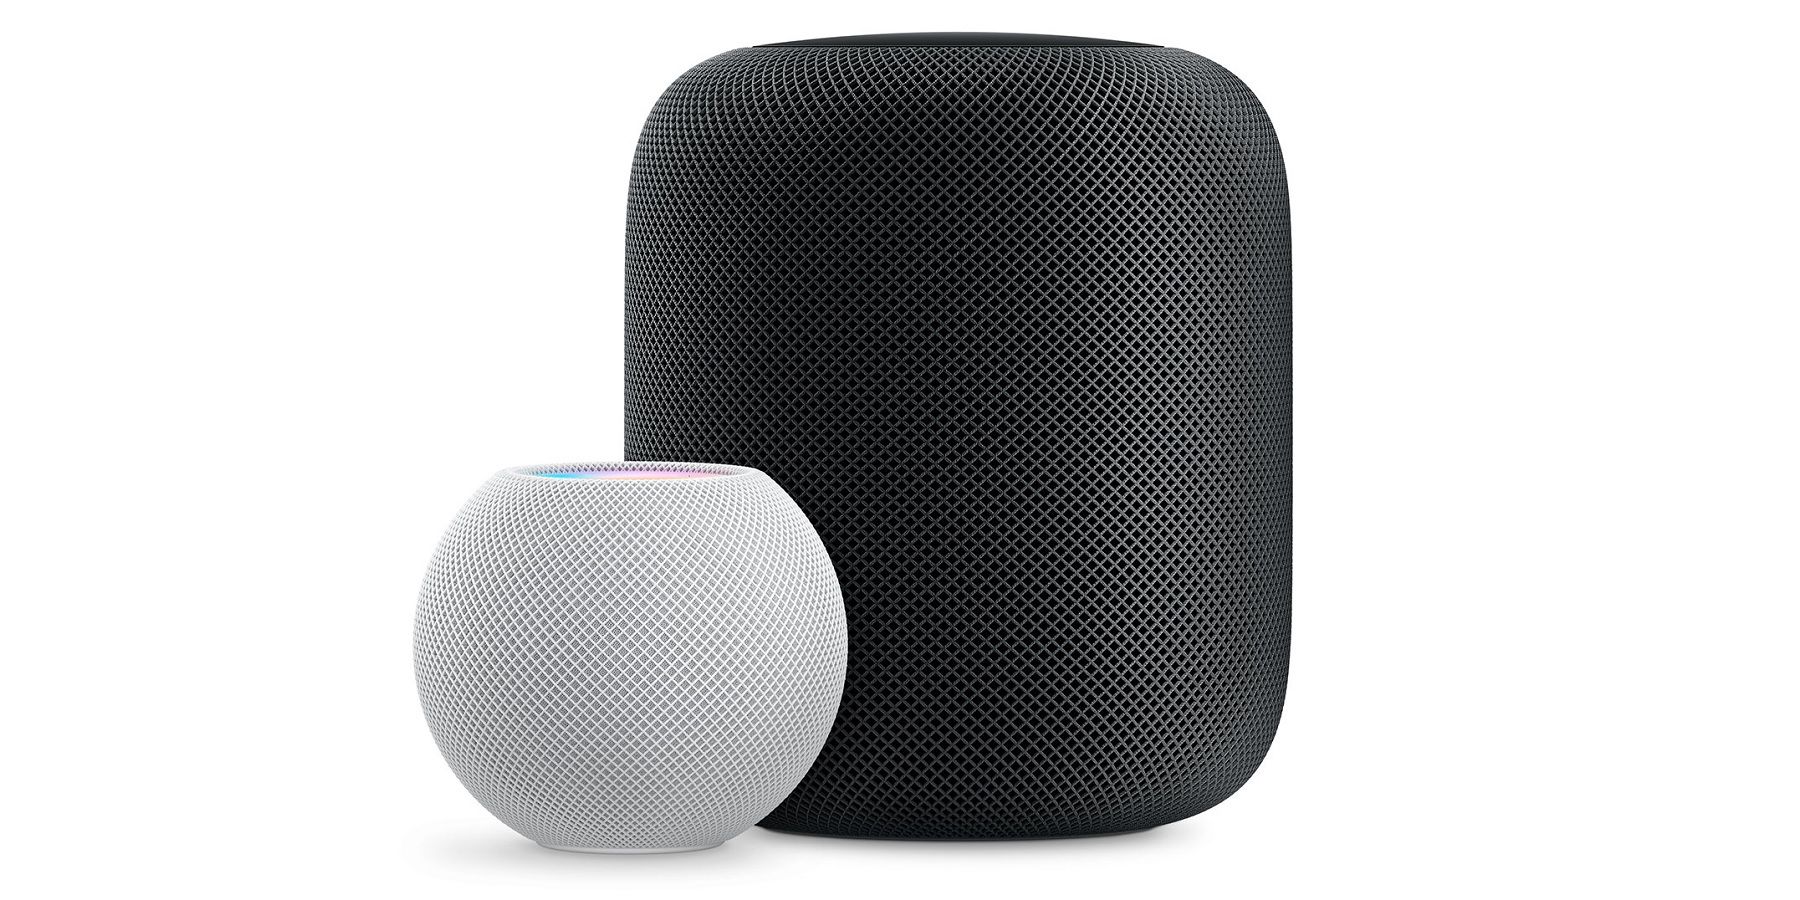 How To Enable Dolby Atmos And Lossless Audio For Apple Music On HomePod